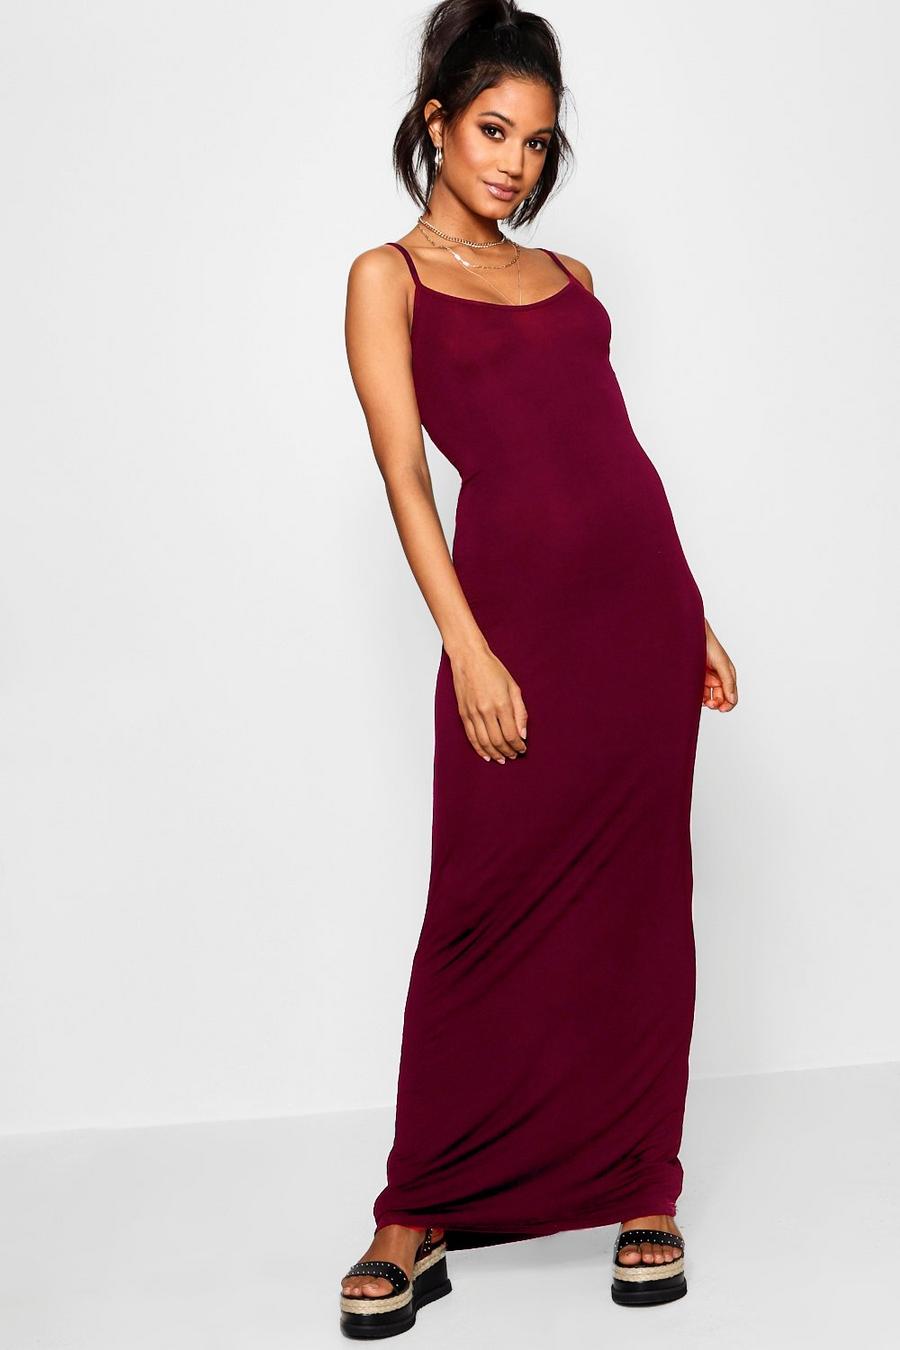 Berry red Basic Strappy Maxi Dress